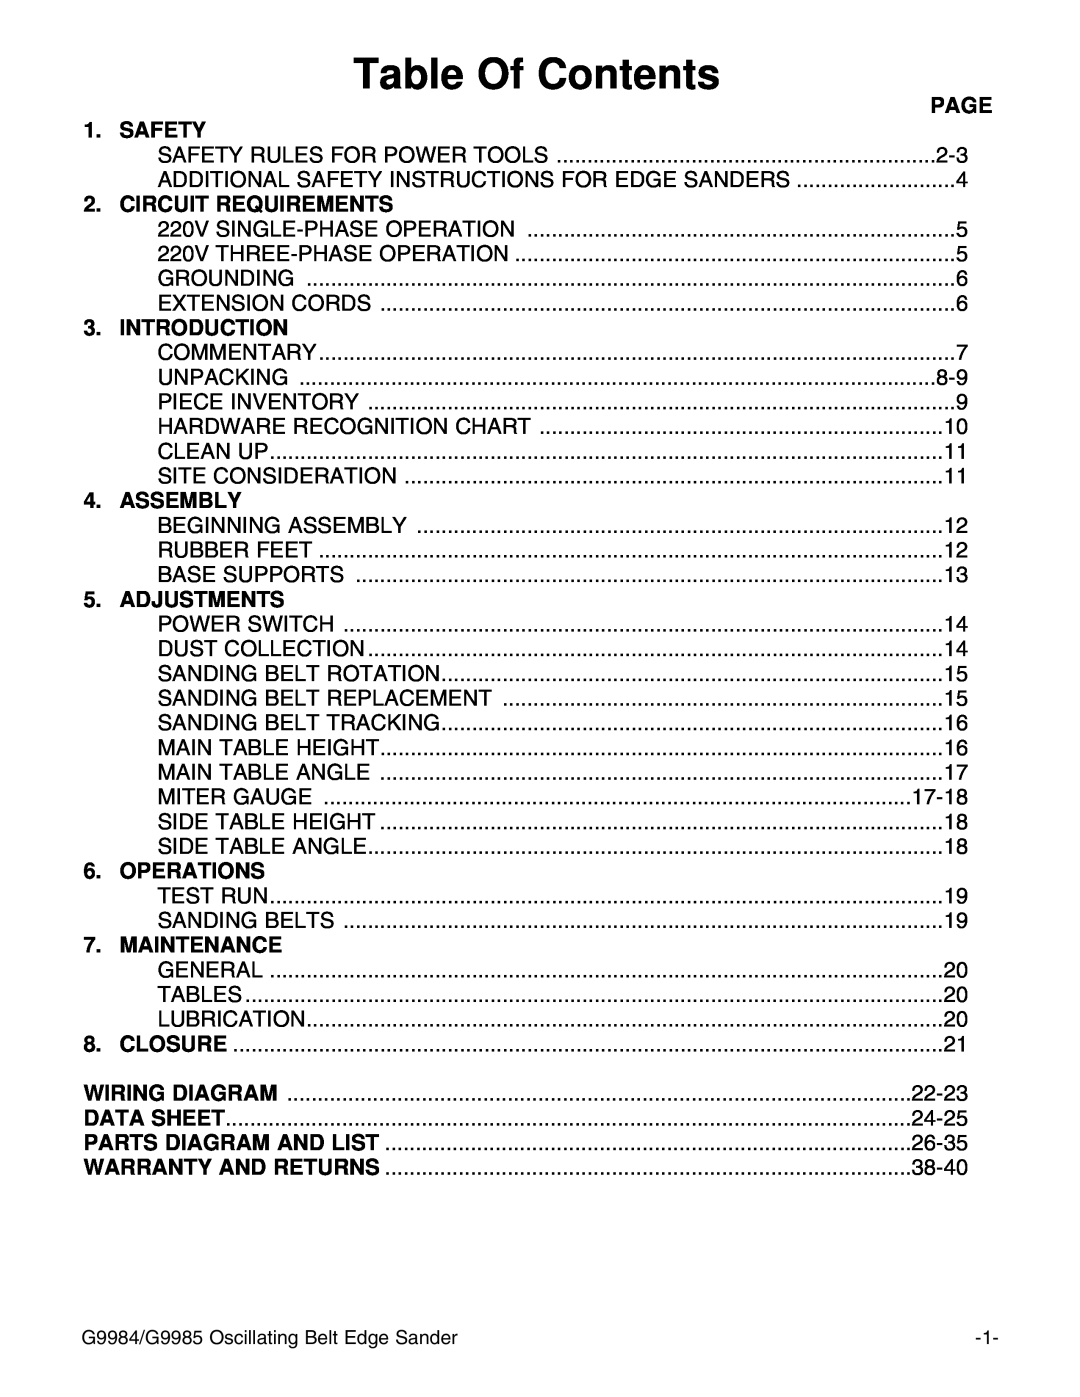 Grizzly G9985 Table Of Contents, Page, Safety, Circuit Requirements, Introduction, Assembly, Adjustments, 17-18, 22-23 